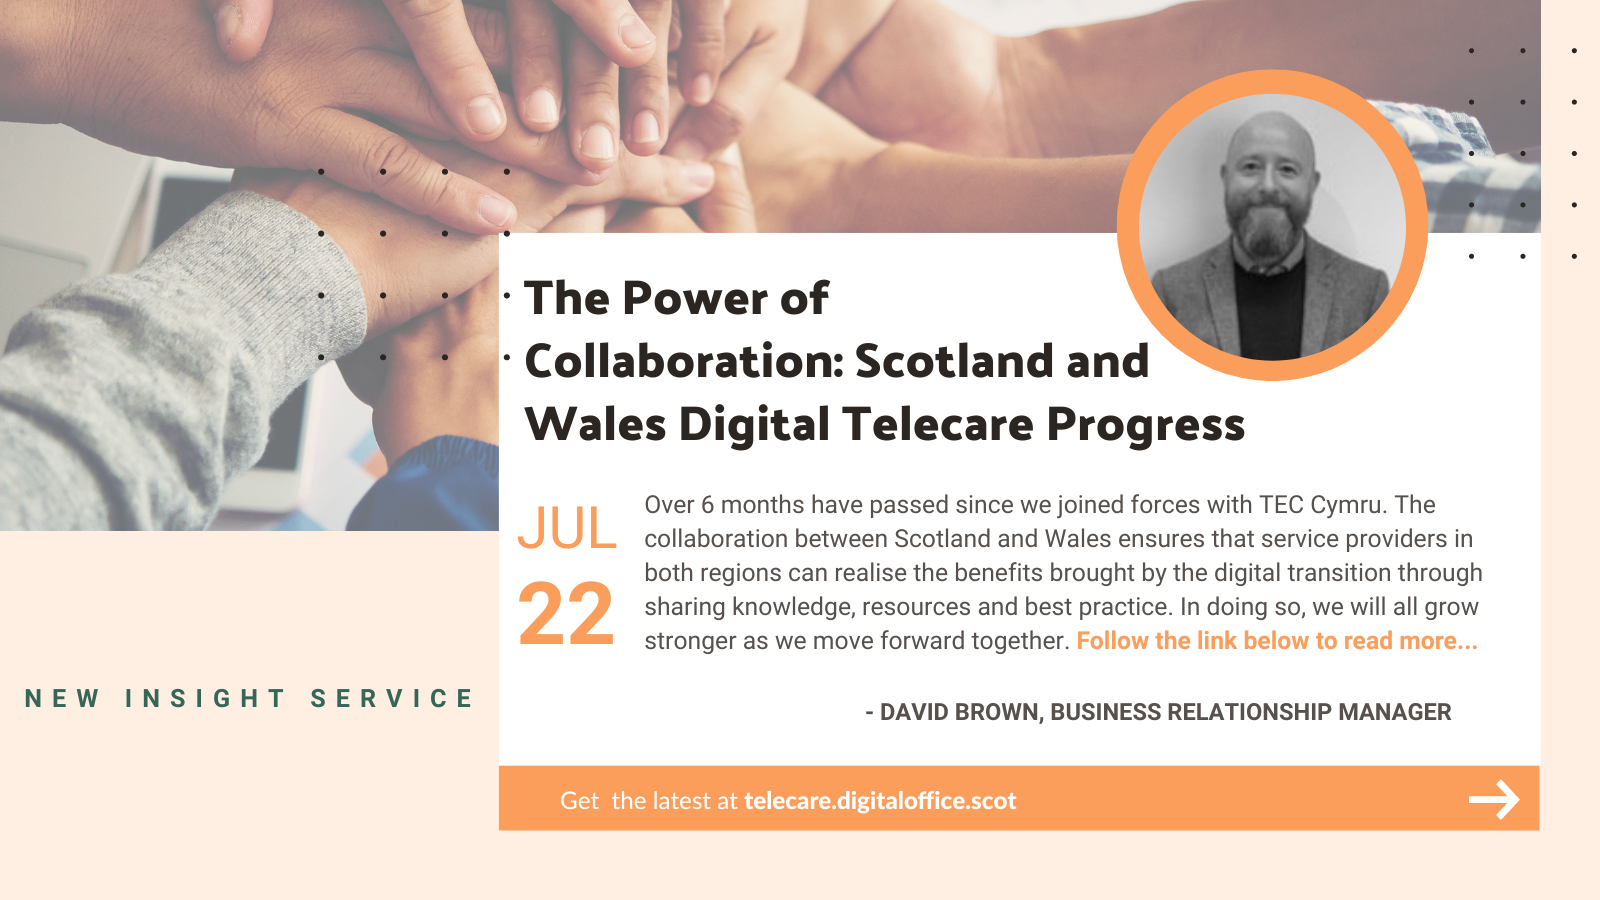 The Power of Collaboration: Scotland and Wales Digital Telecare Progress